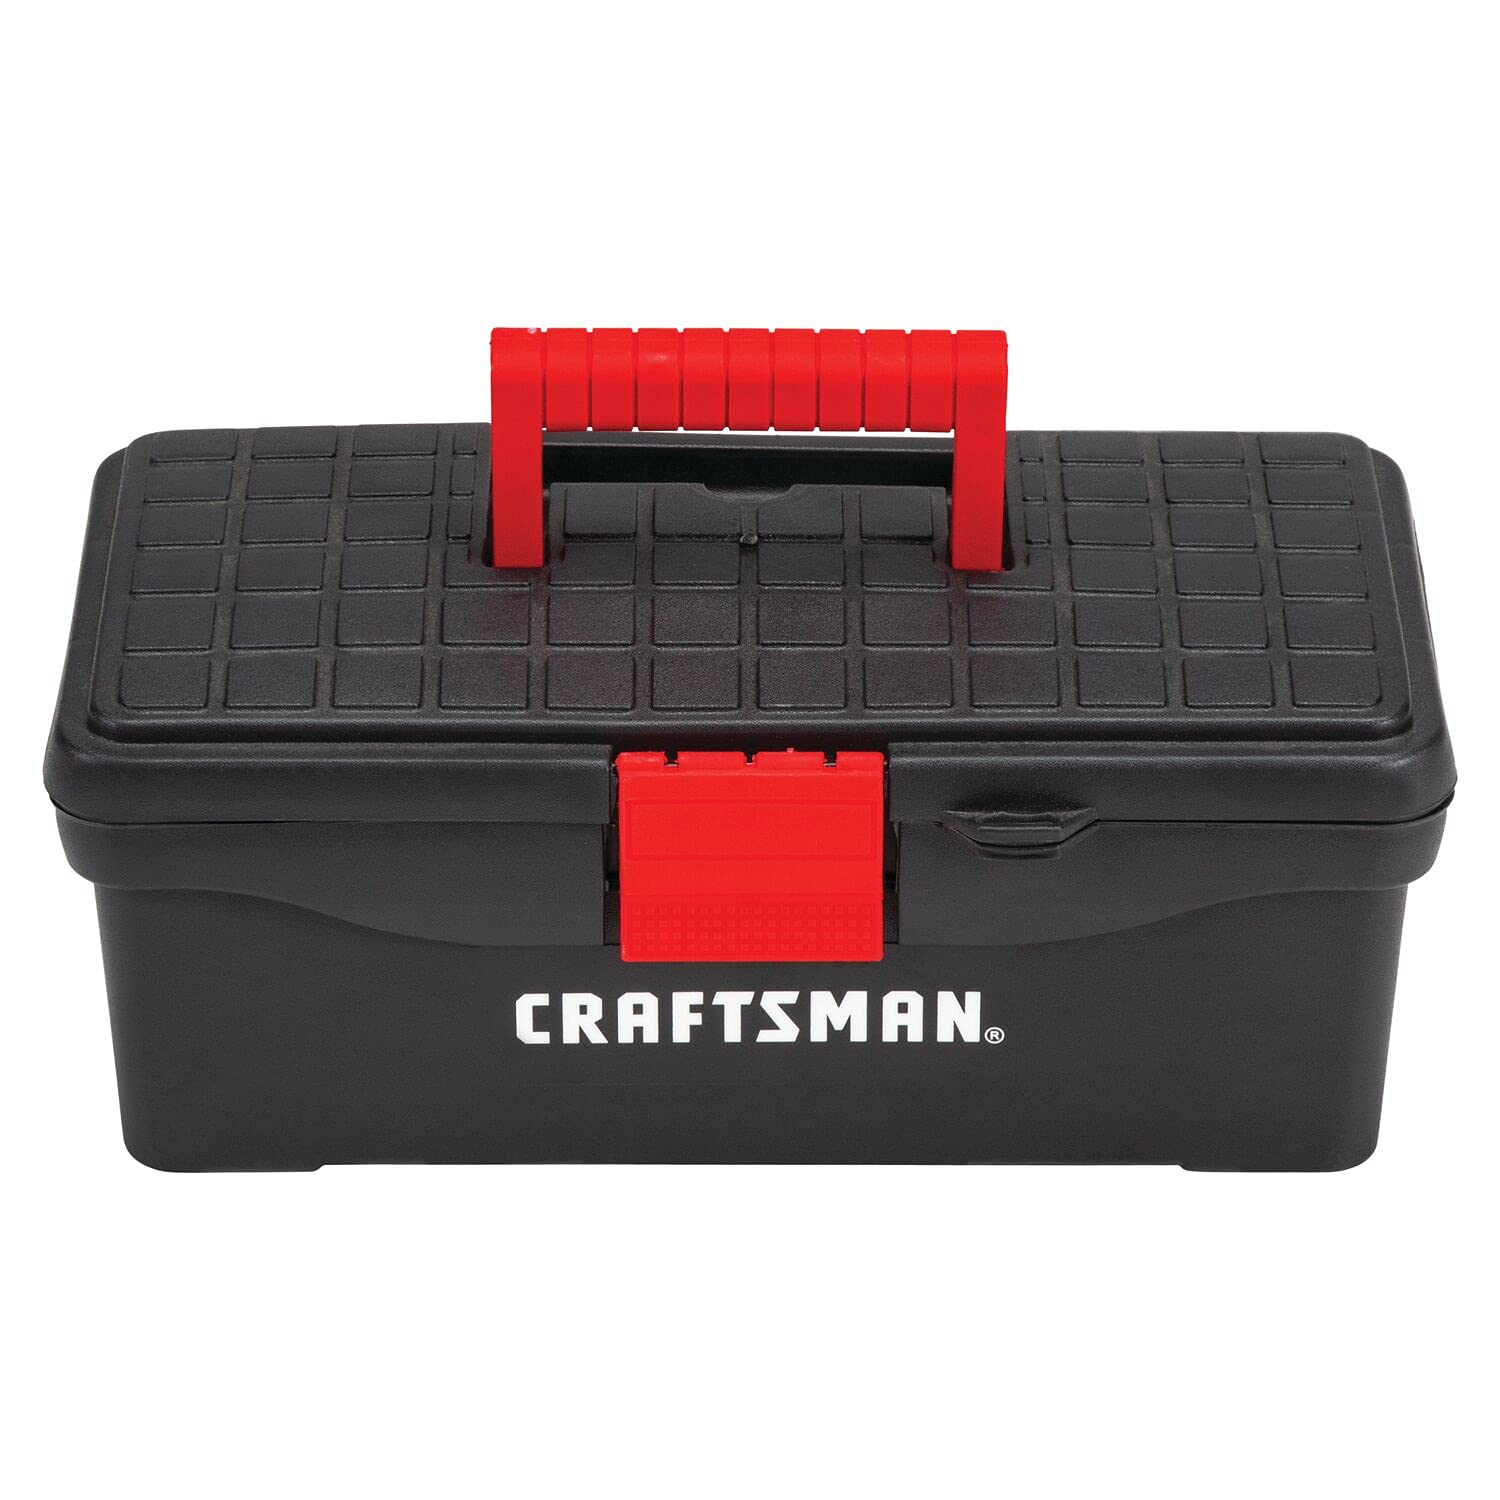 13" Craftsman Plastic Lockable Tool Box (Red) $10 + Free Shipping w/ Prime or on $35+